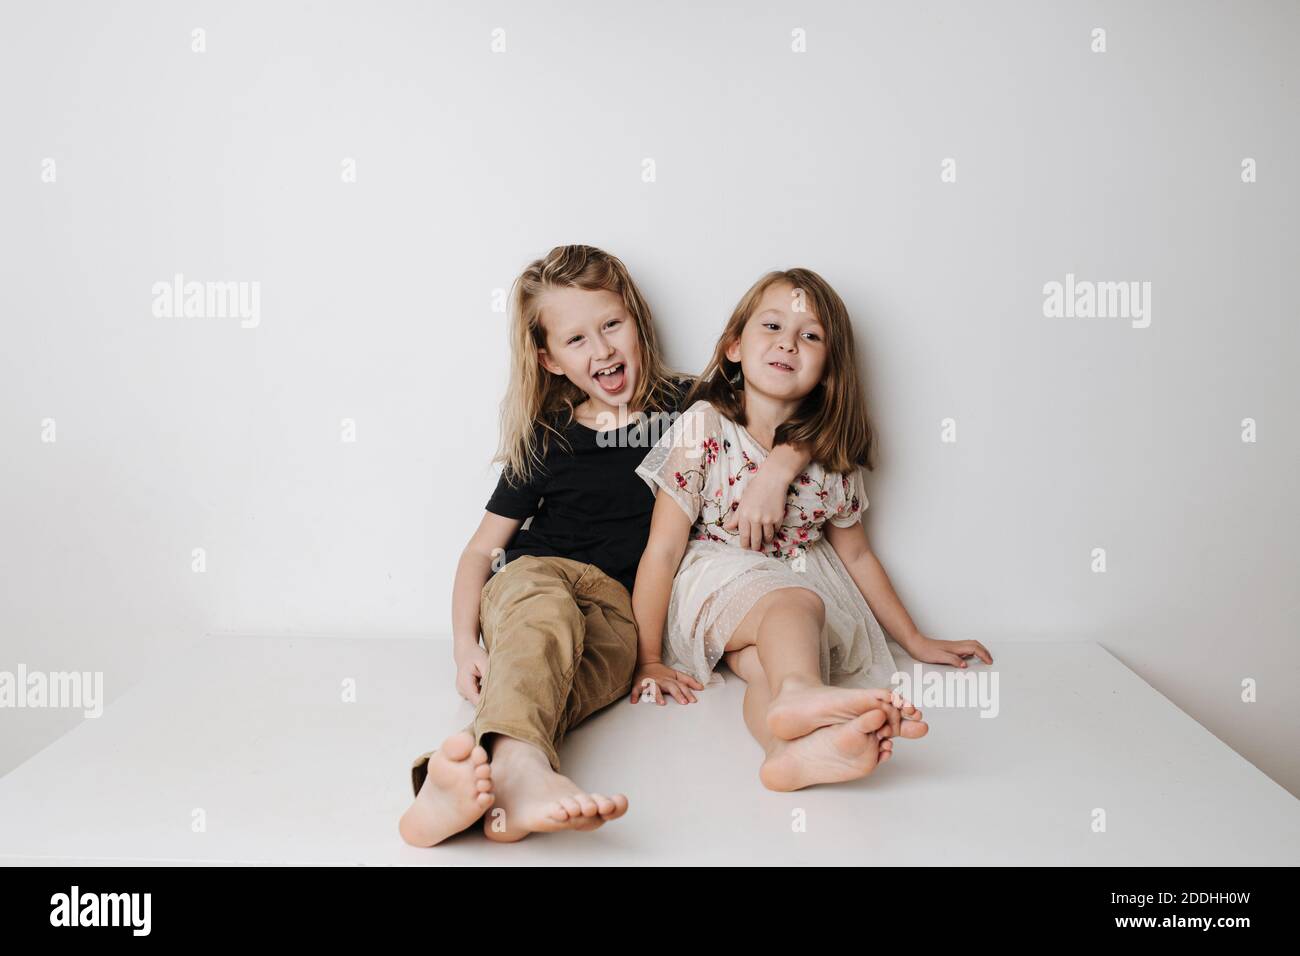 Naughty boy hugs girl, she leans away. Siblings sitting together on a table. Stock Photo